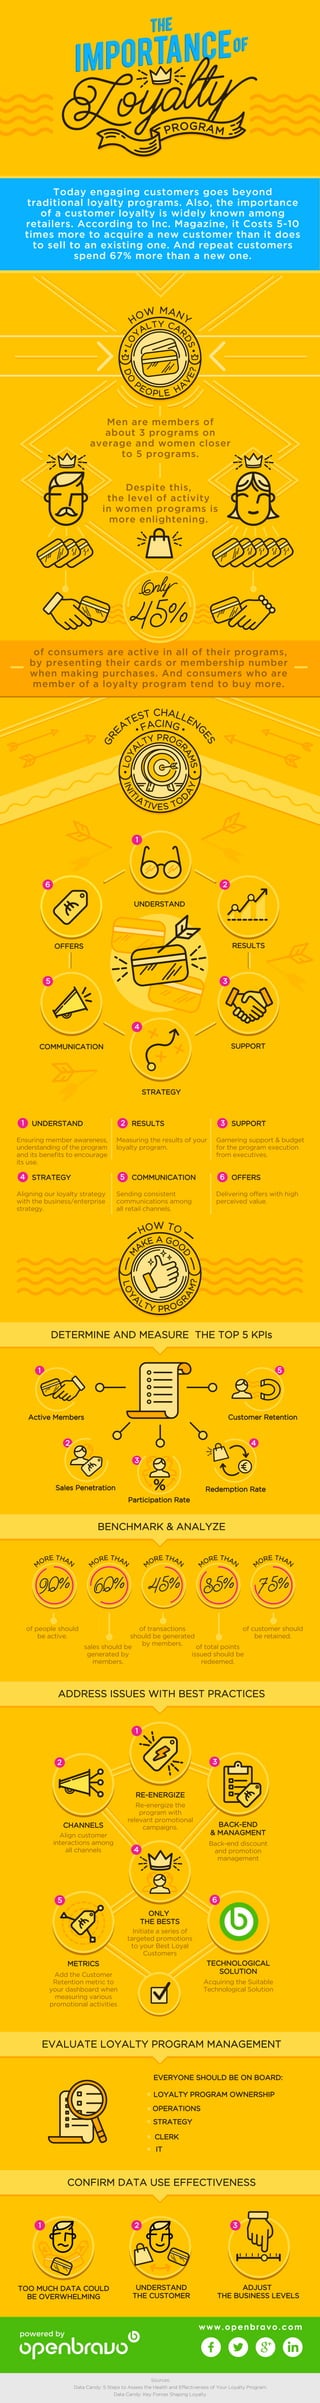 The Importance of Loyalty Programs - Infographic